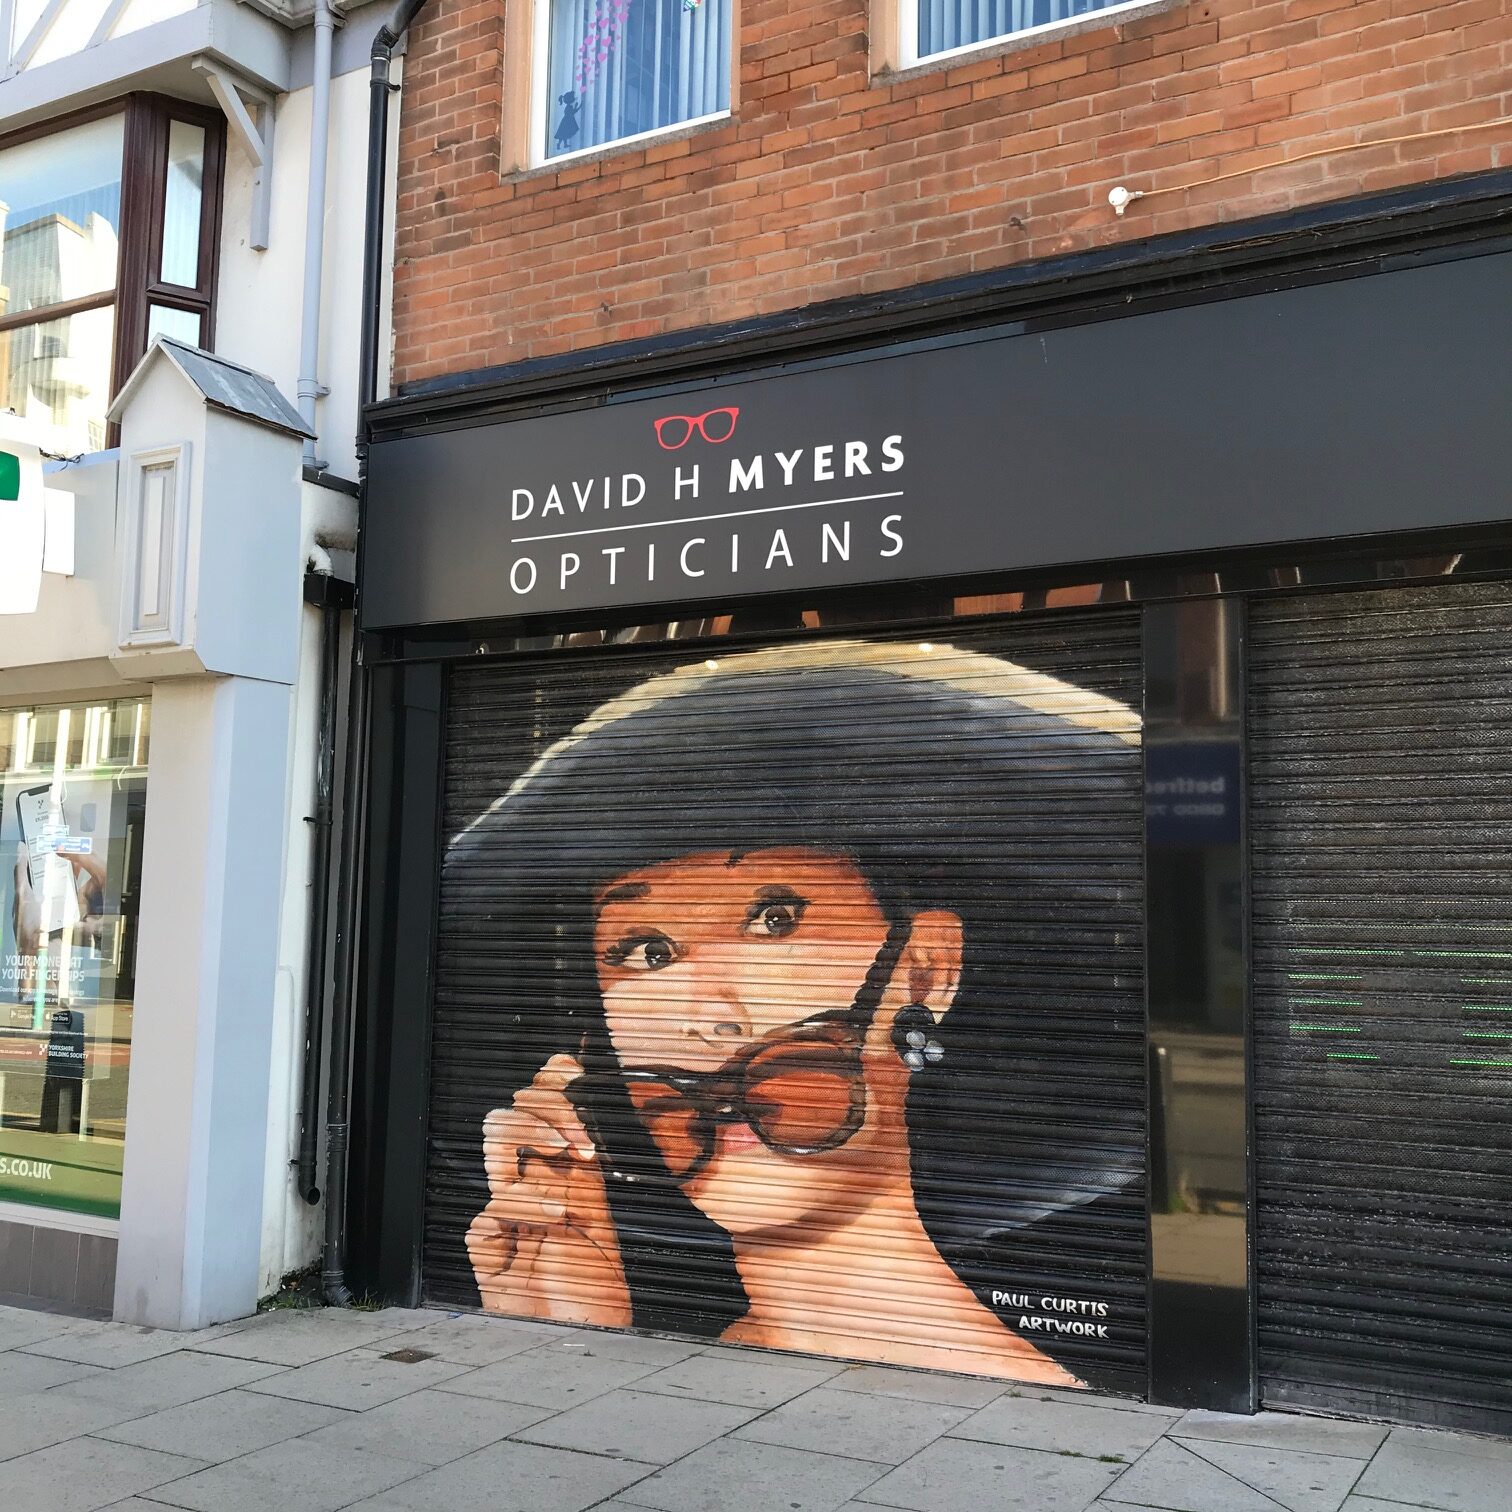 The Audrey Hepburn mural outside David H Myers Opticians on London Street in Southport